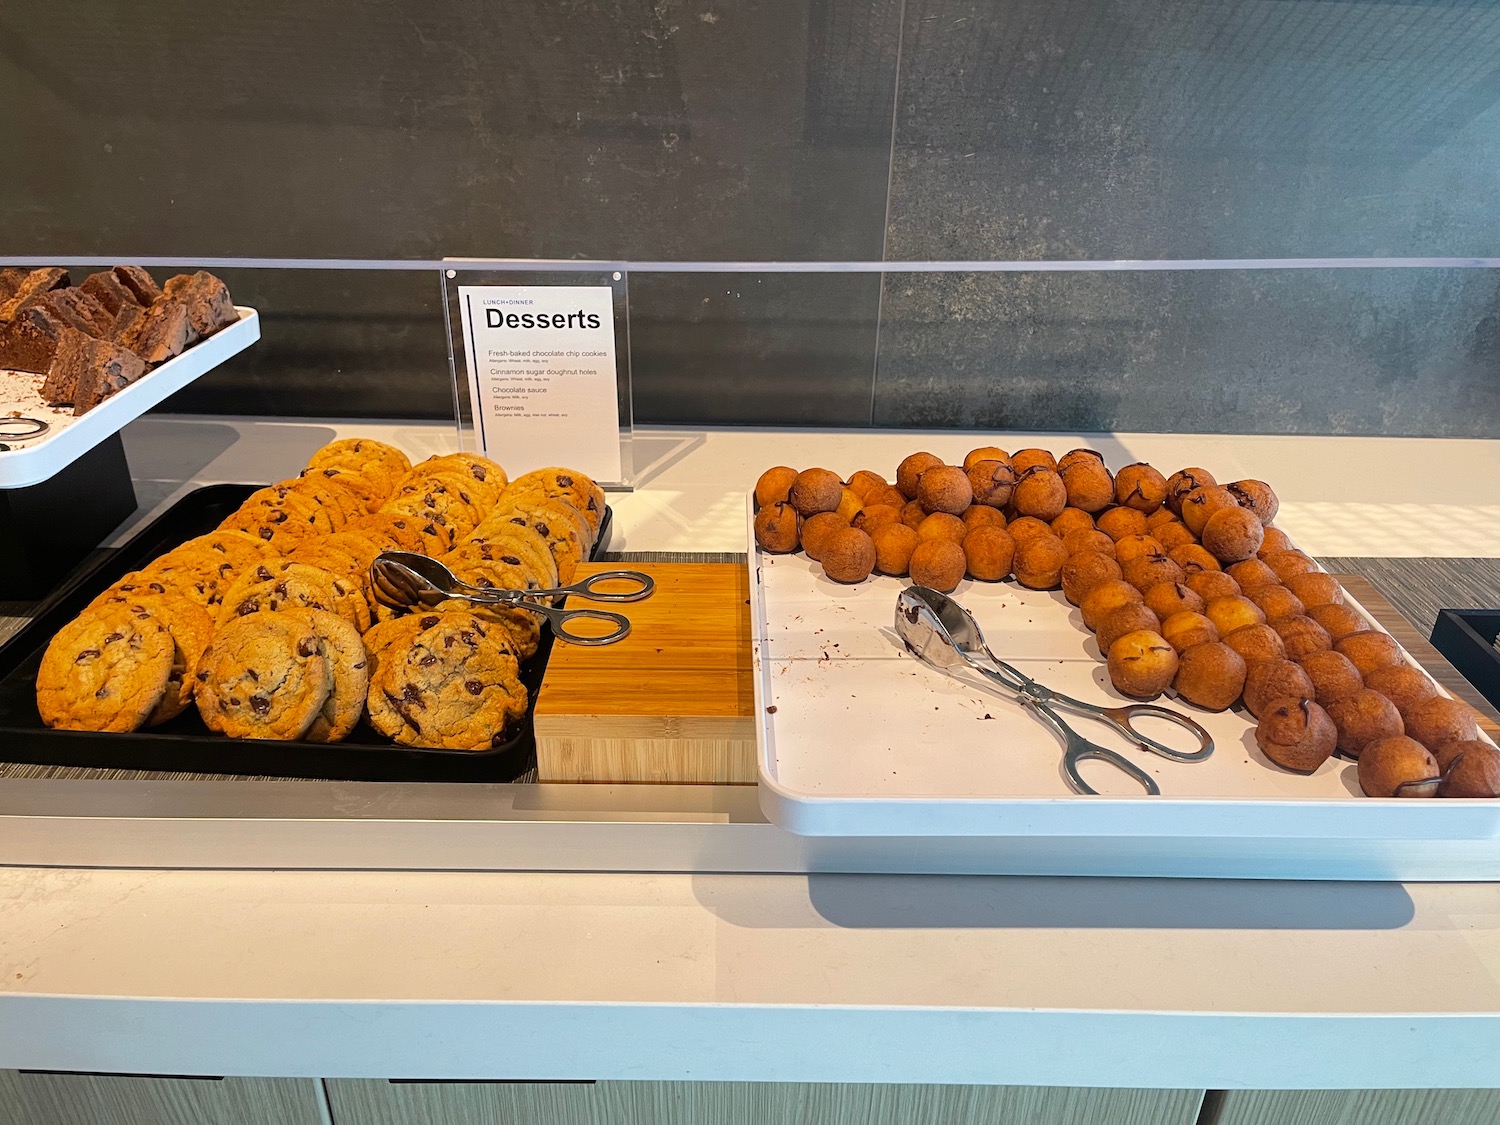 a tray of cookies and desserts on a counter